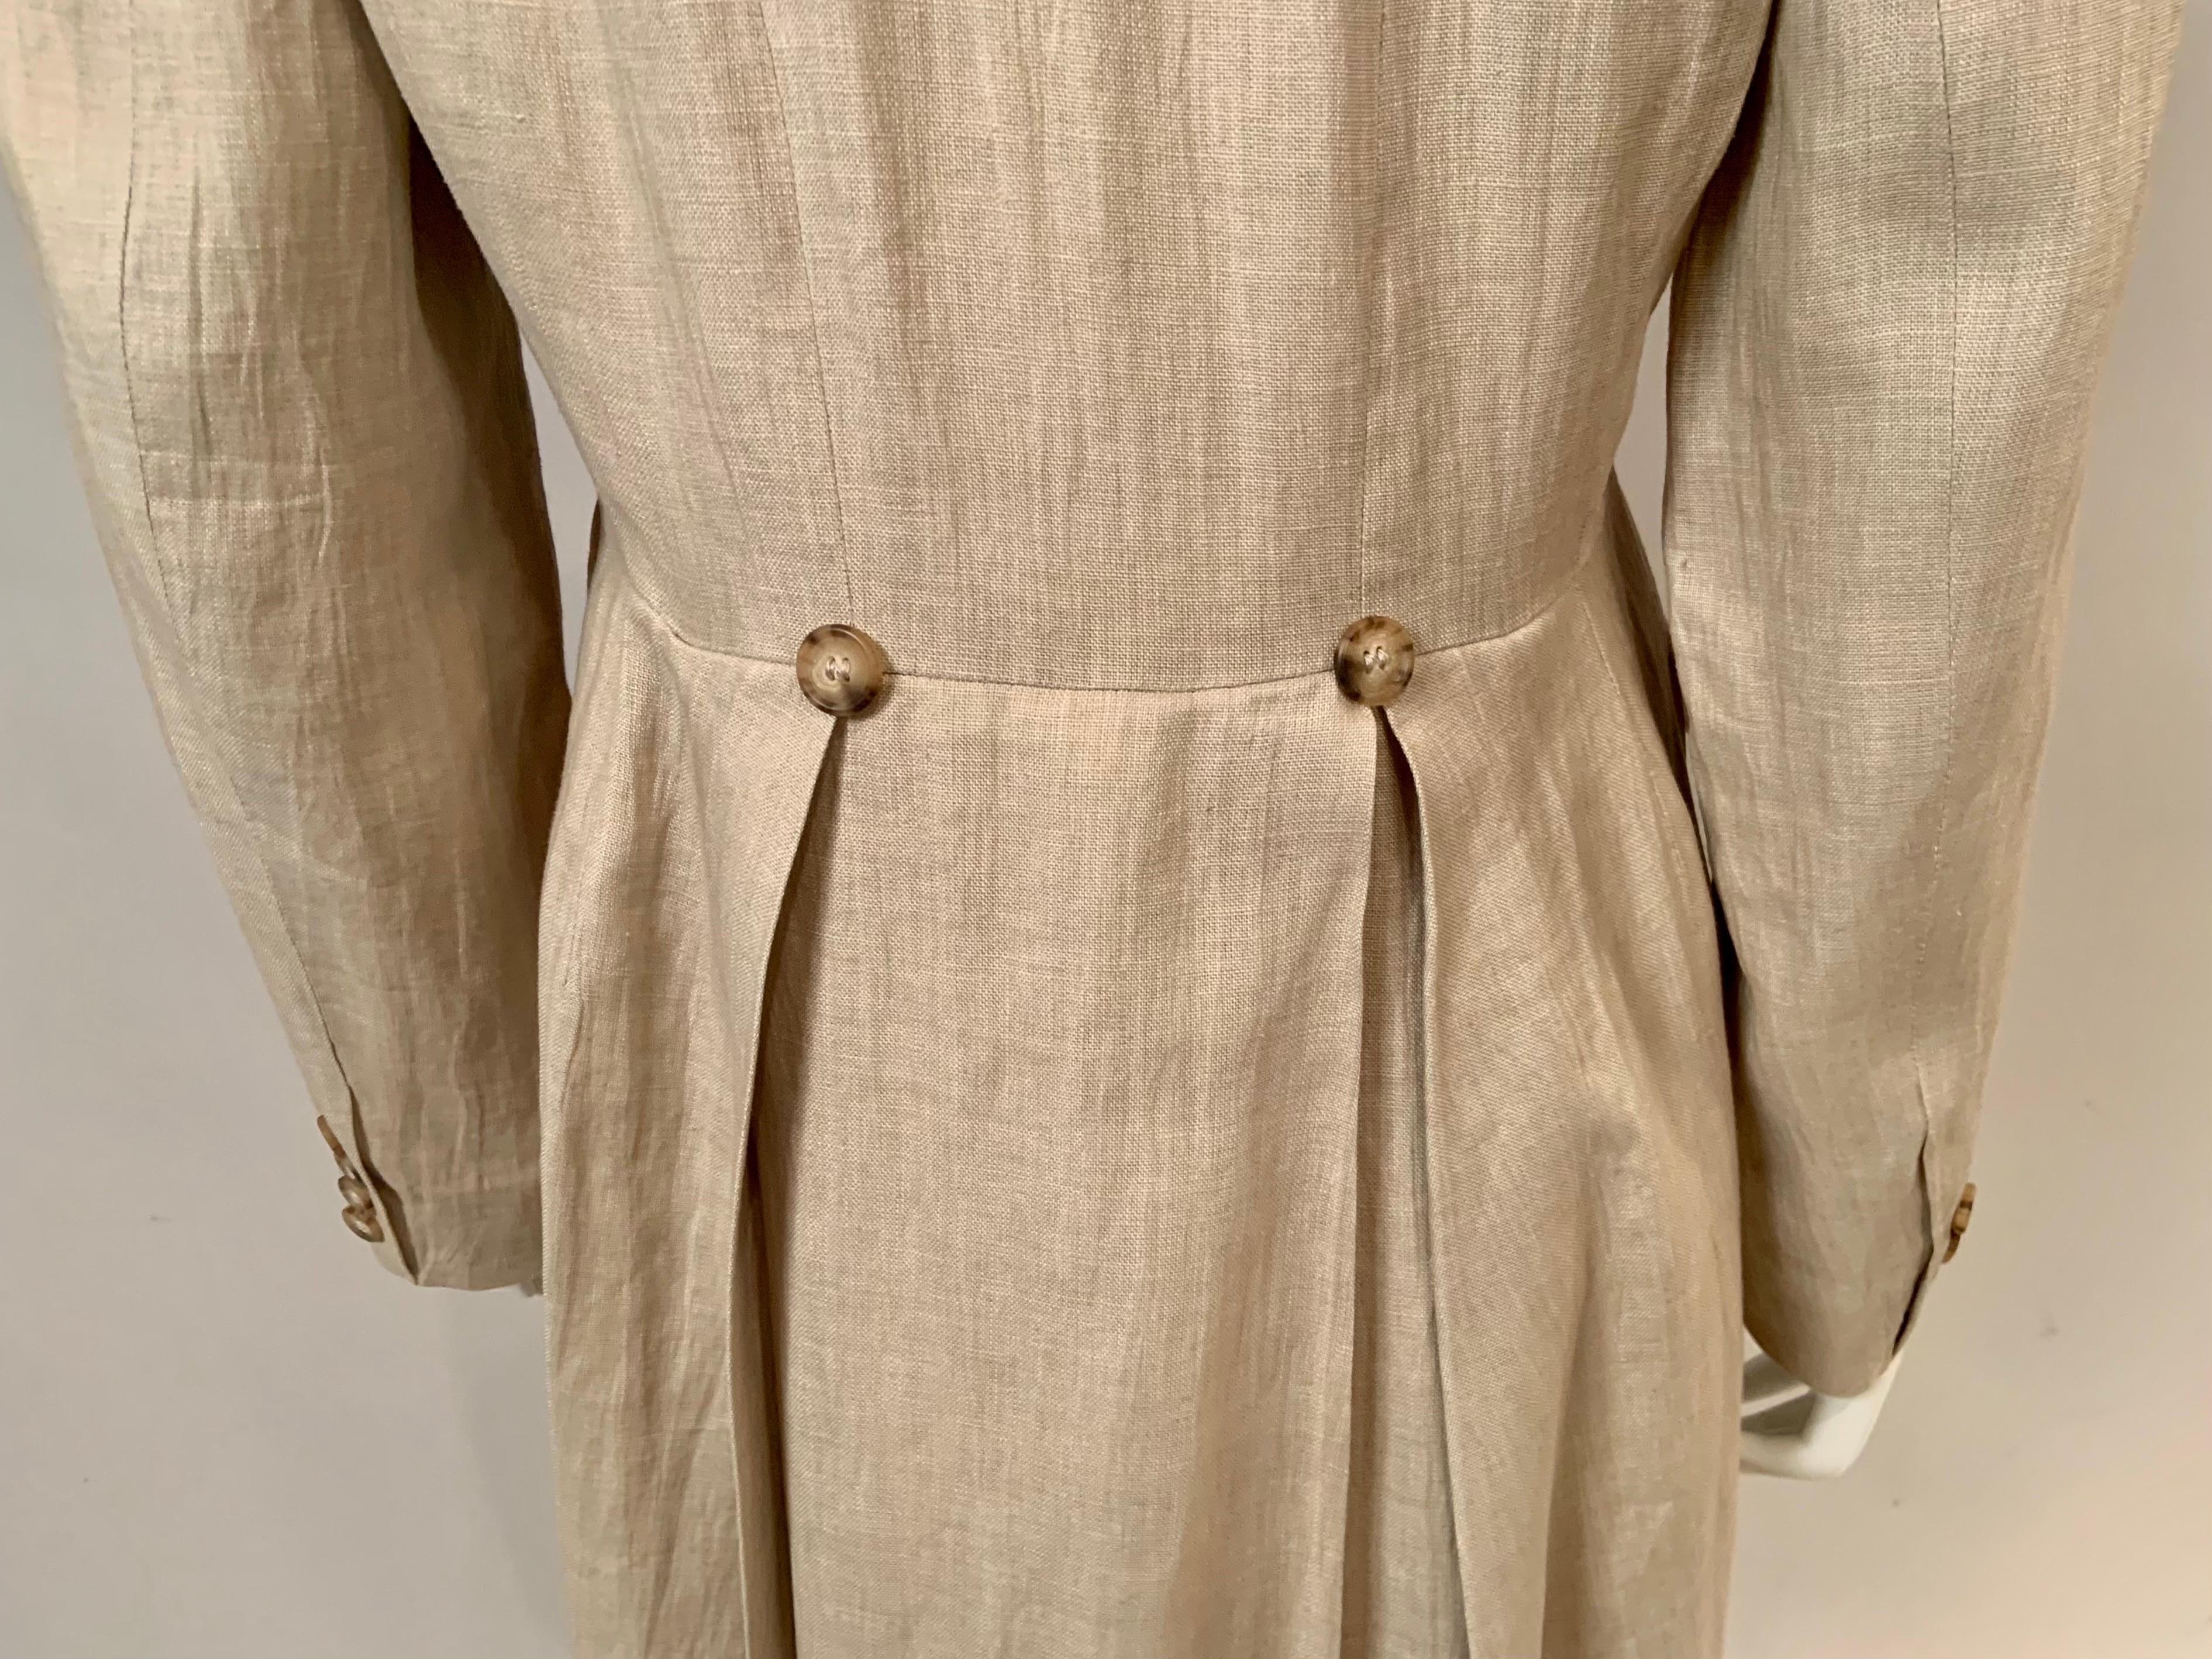 Irish Linen Duster Coat Made in Ireland by Willis & Geiger Outfitters For Sale 5